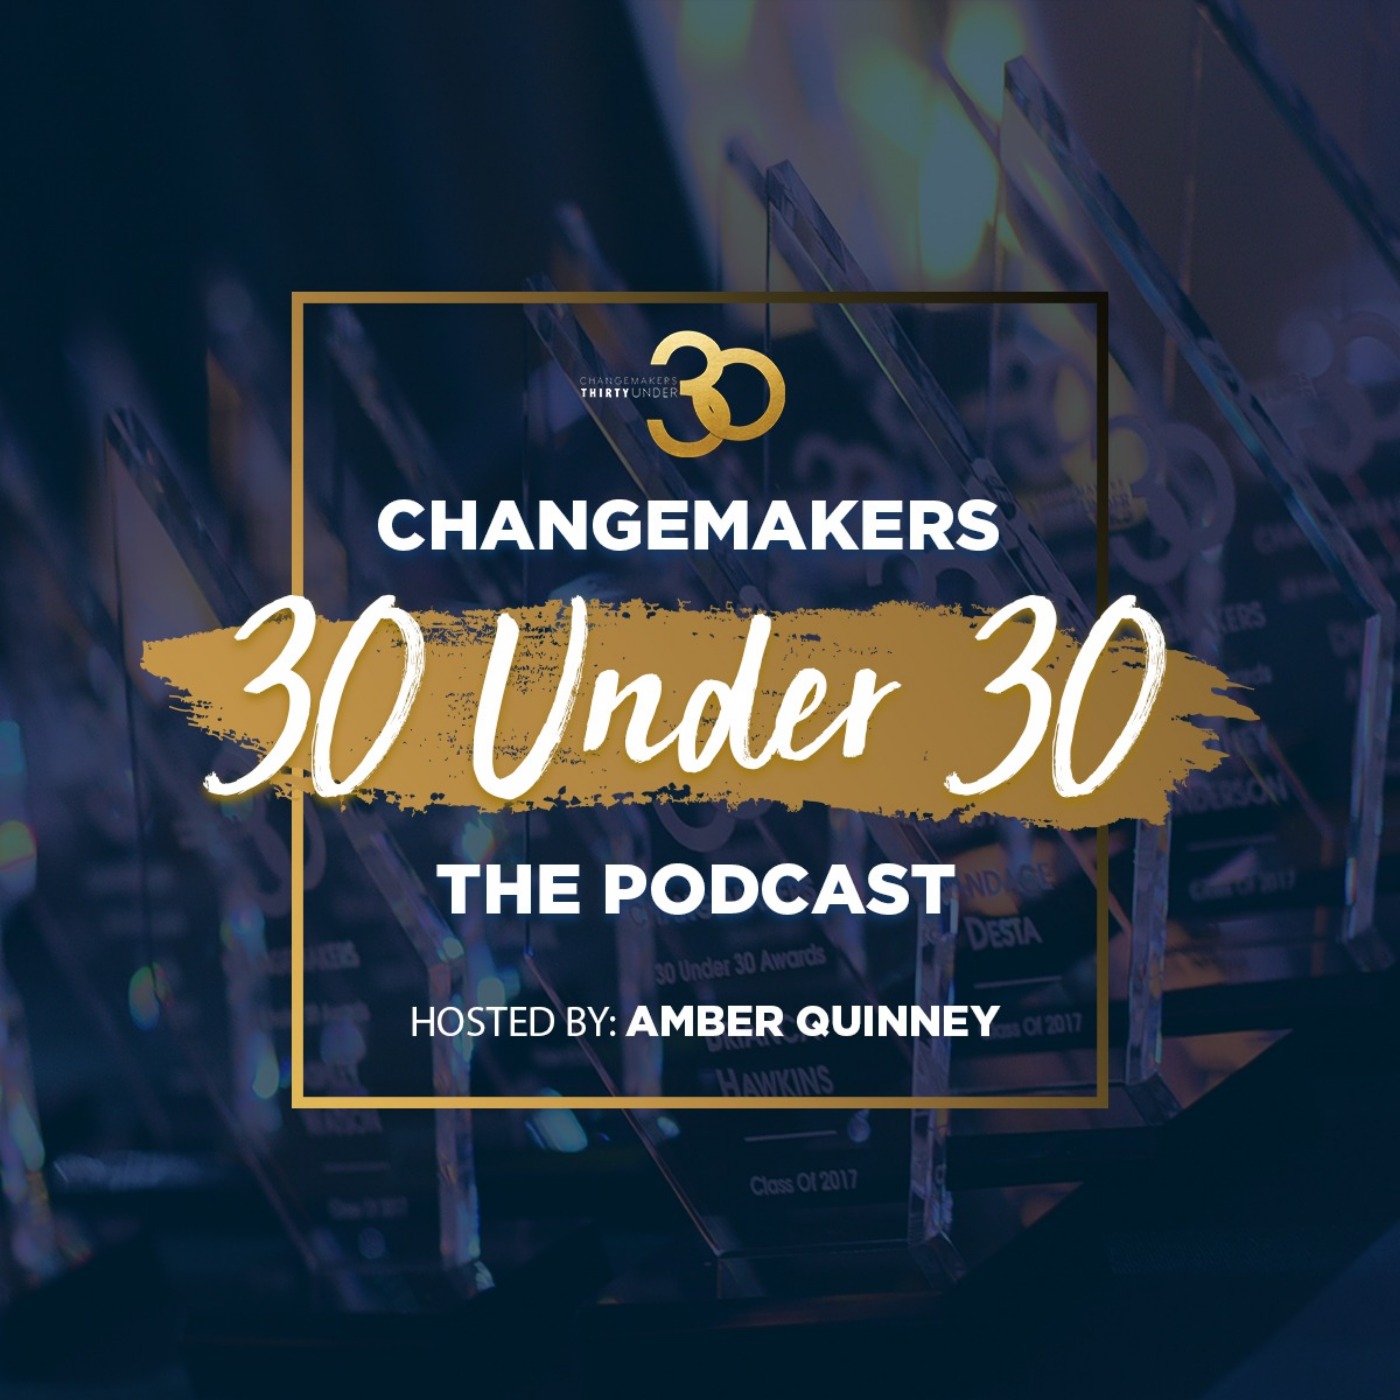 Changemakers 30 Under 30 - The Podcast